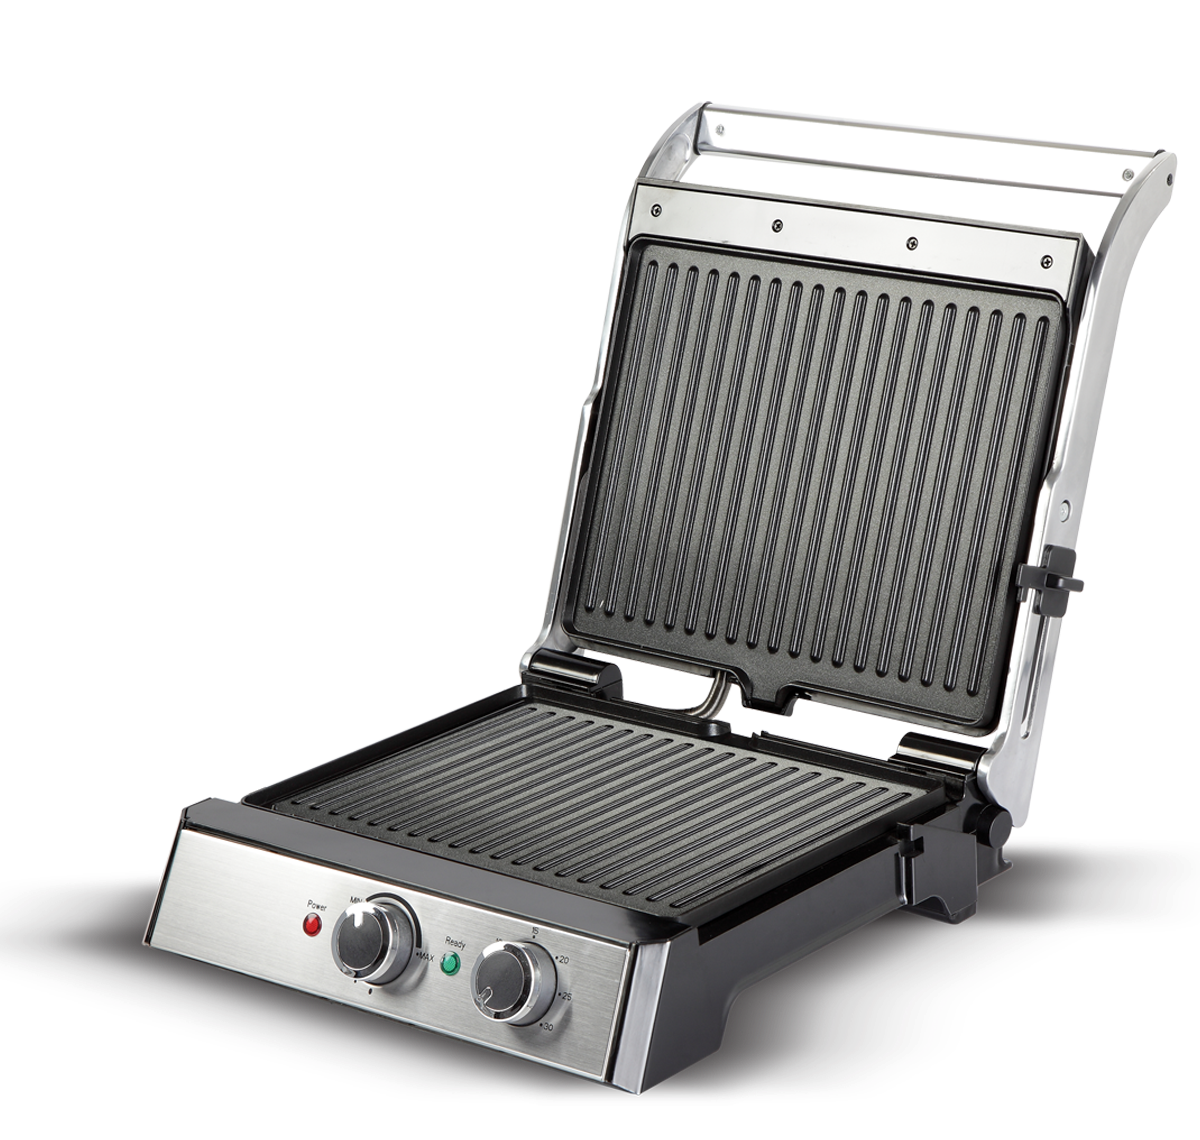 Havells Toastino 4 Slice Grill & BBQ With Timer 180 degree opening sandwich press grill